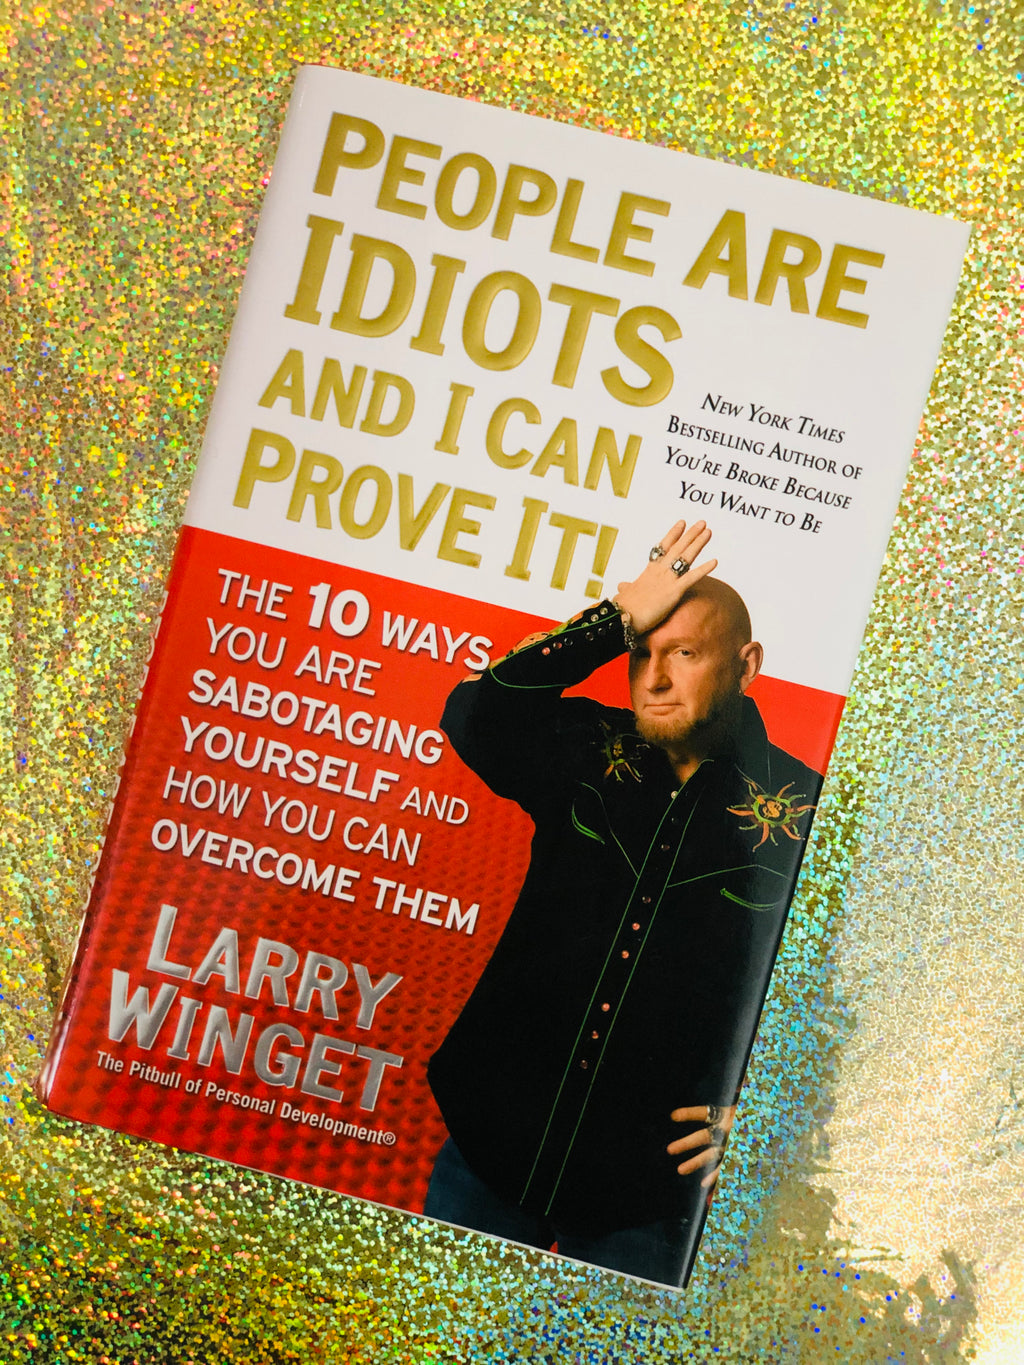 People Are Idiots And I Can Prove It!- By Larry Winget